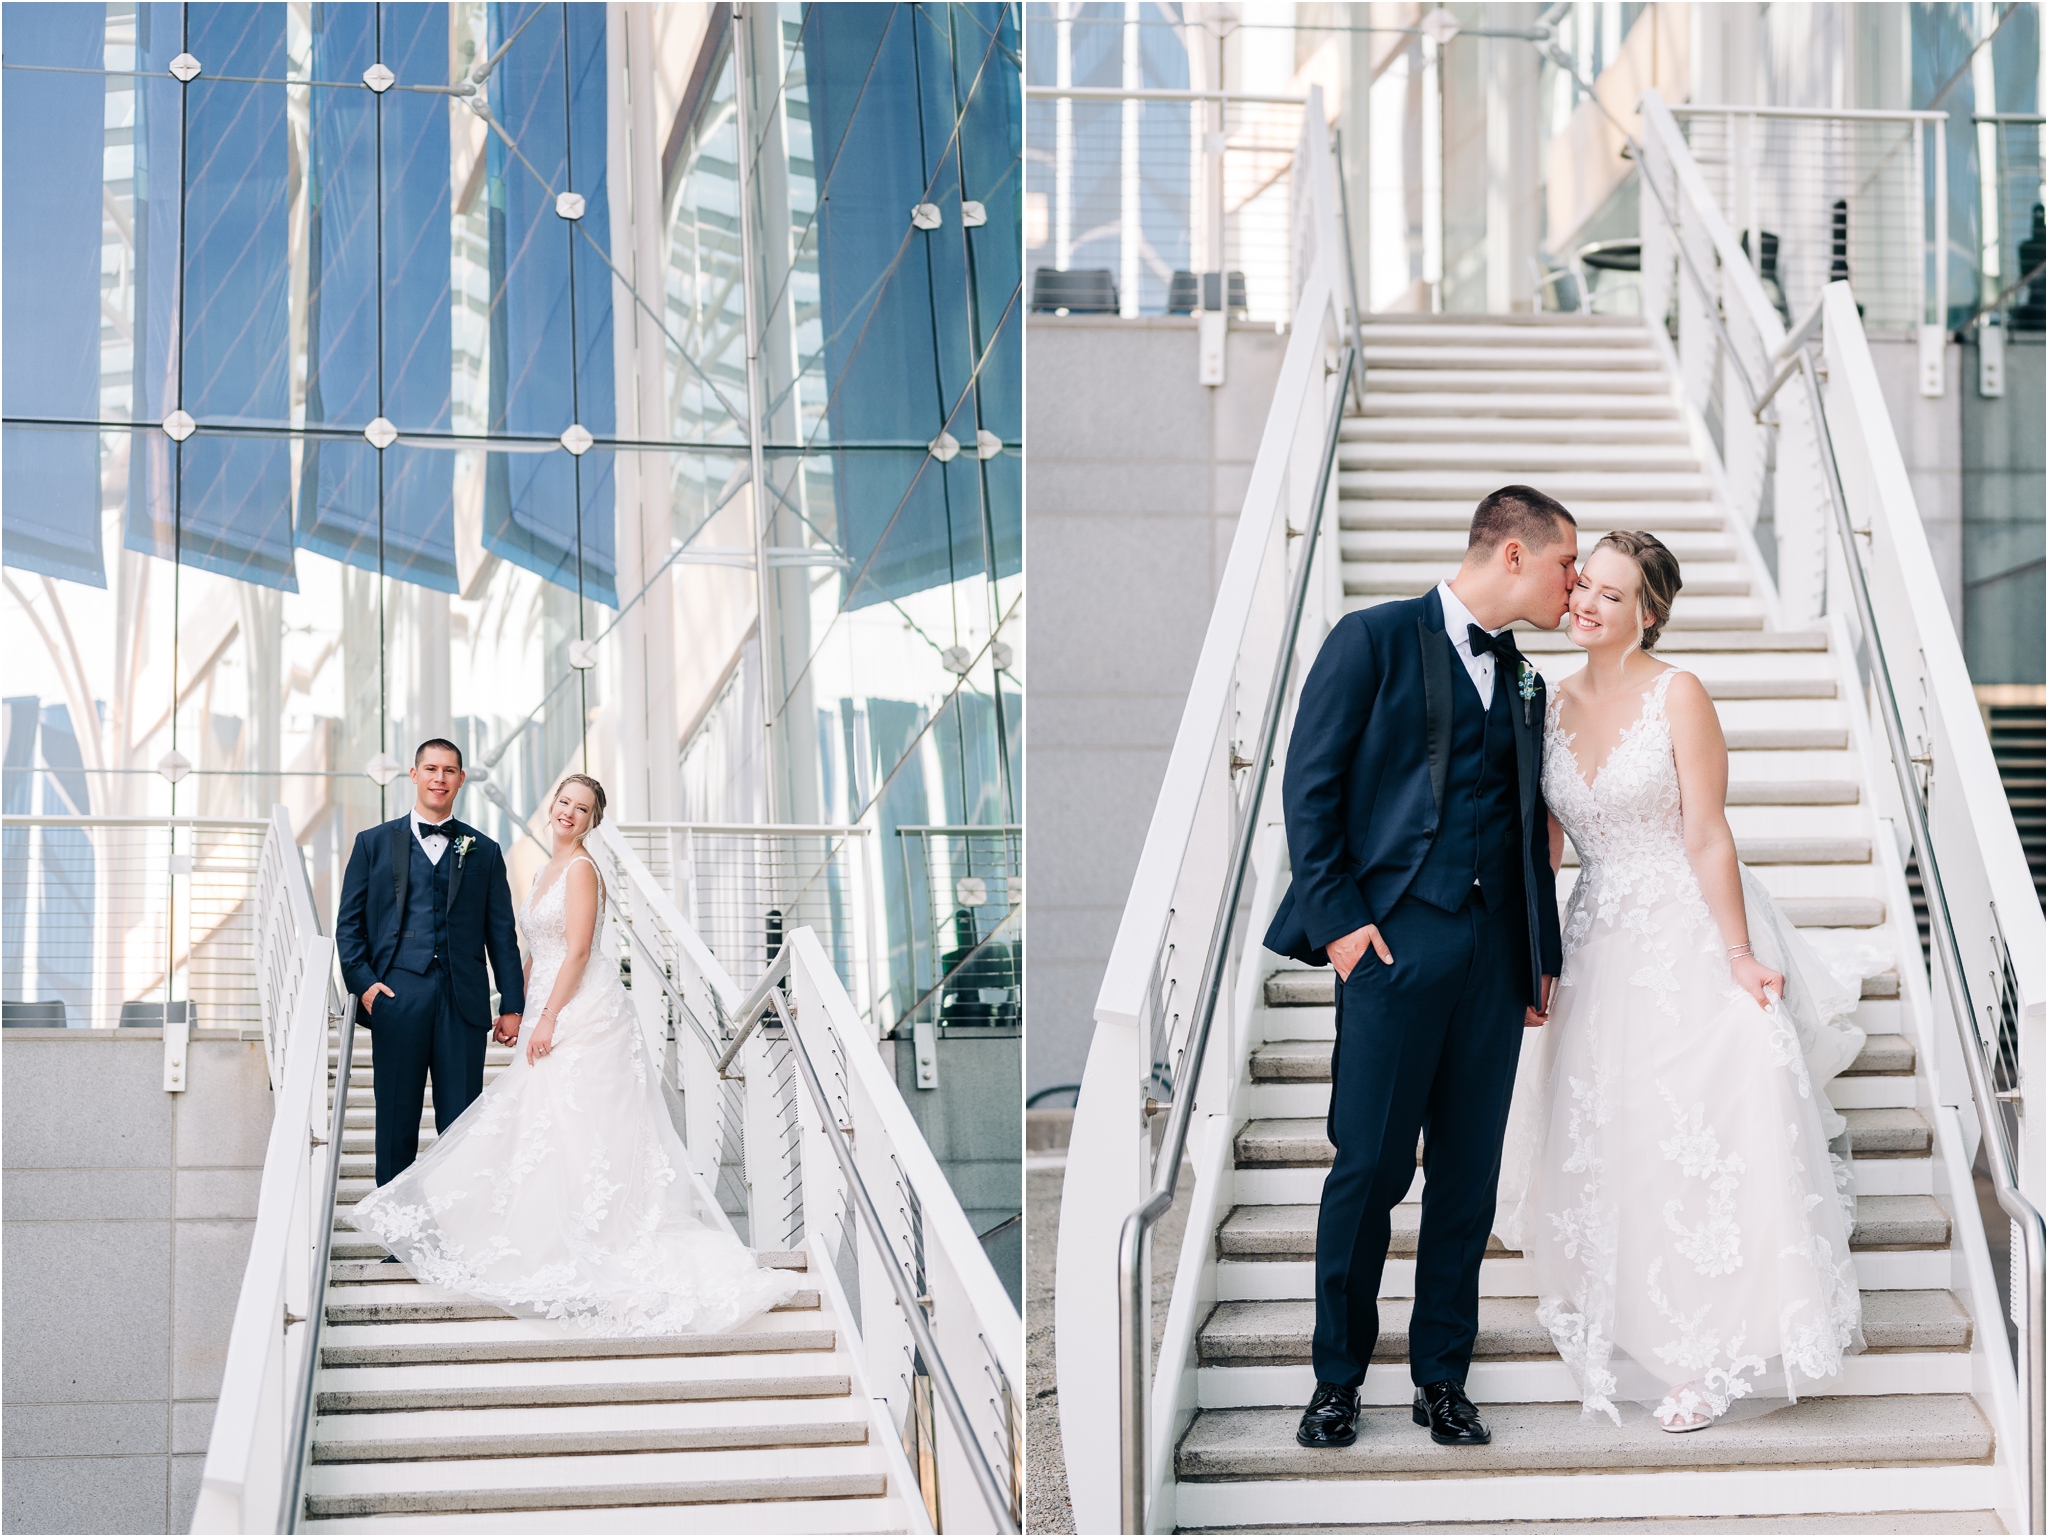 Bride and Groom Photos at the Indianapolis Central Library